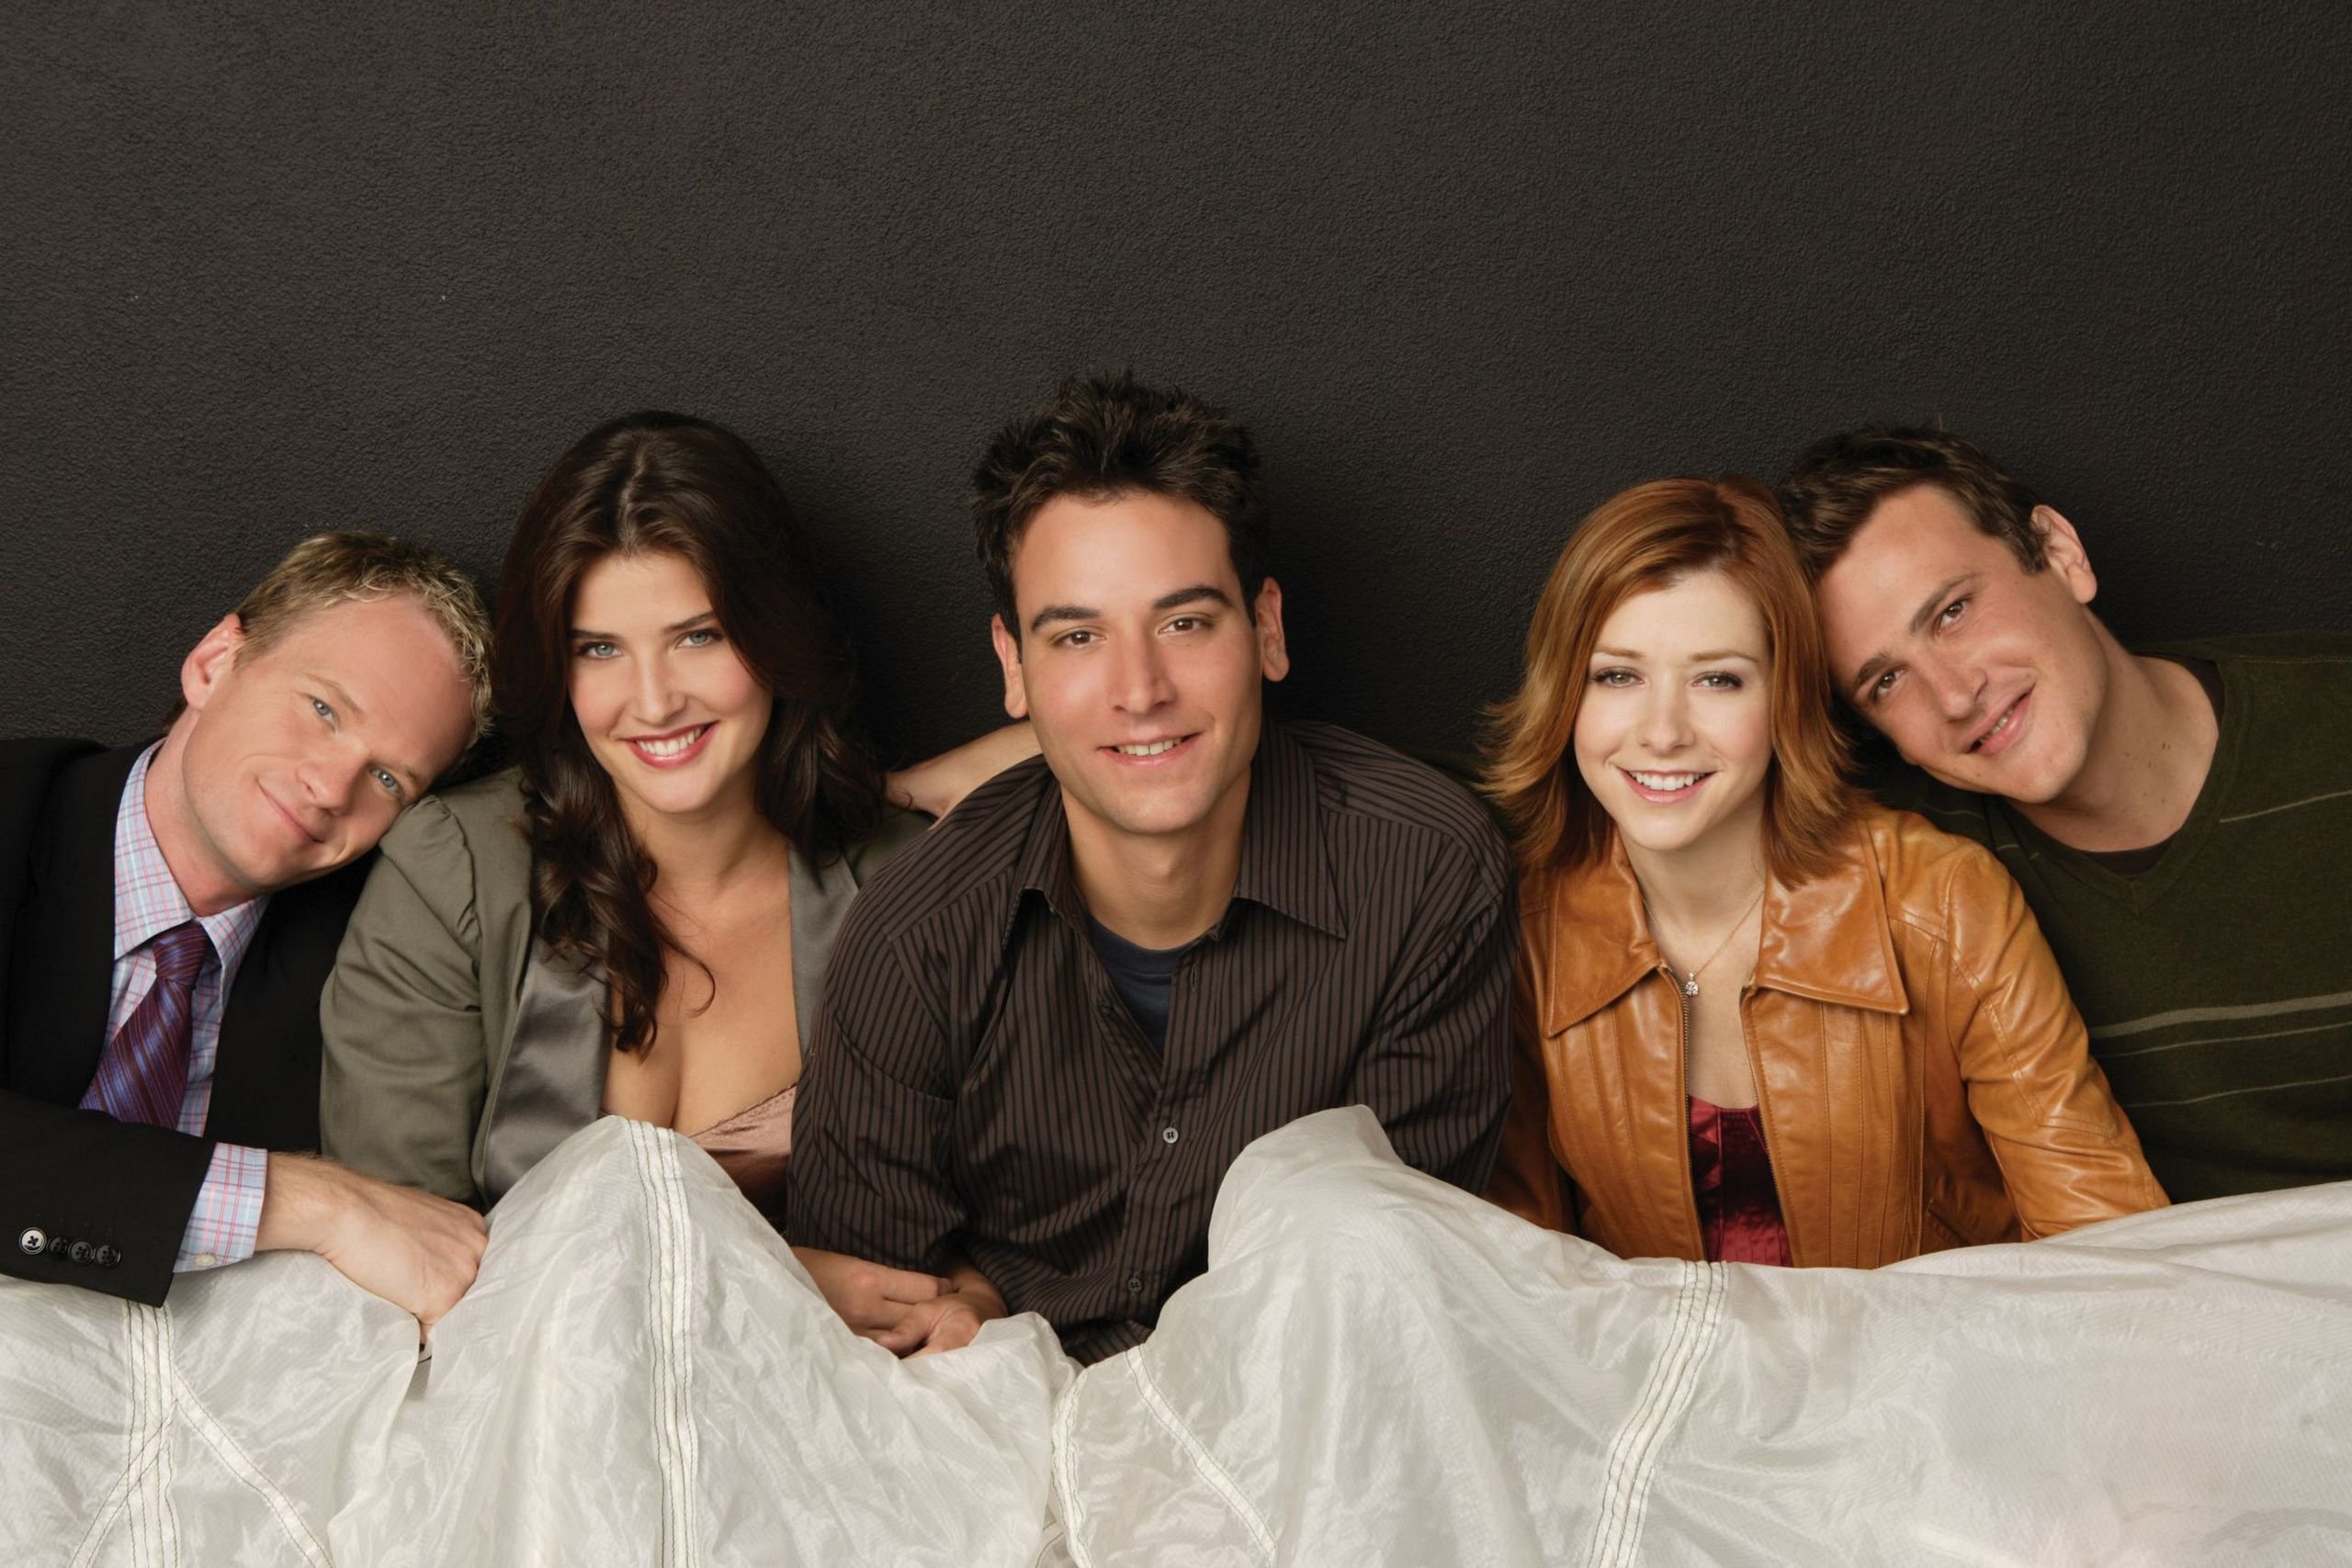 how i met your mother, Comedy, Sitcom, Series, Television, How, Met, Mother,  37 Wallpaper